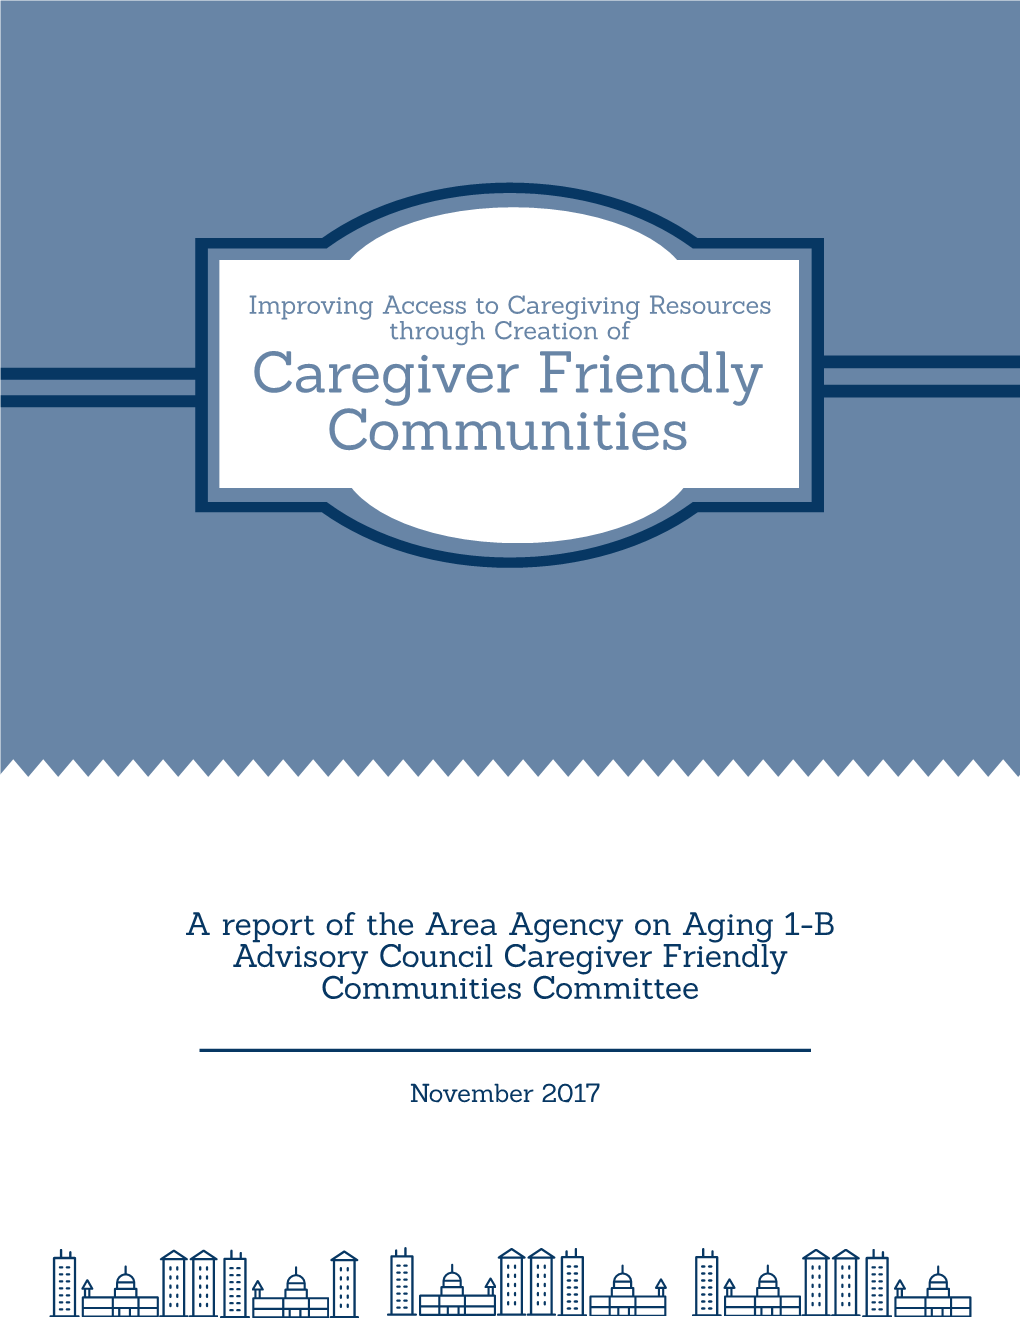 A Report of the Area Agency on Aging 1-B Advisory Council Caregiver Friendly Communities Committee